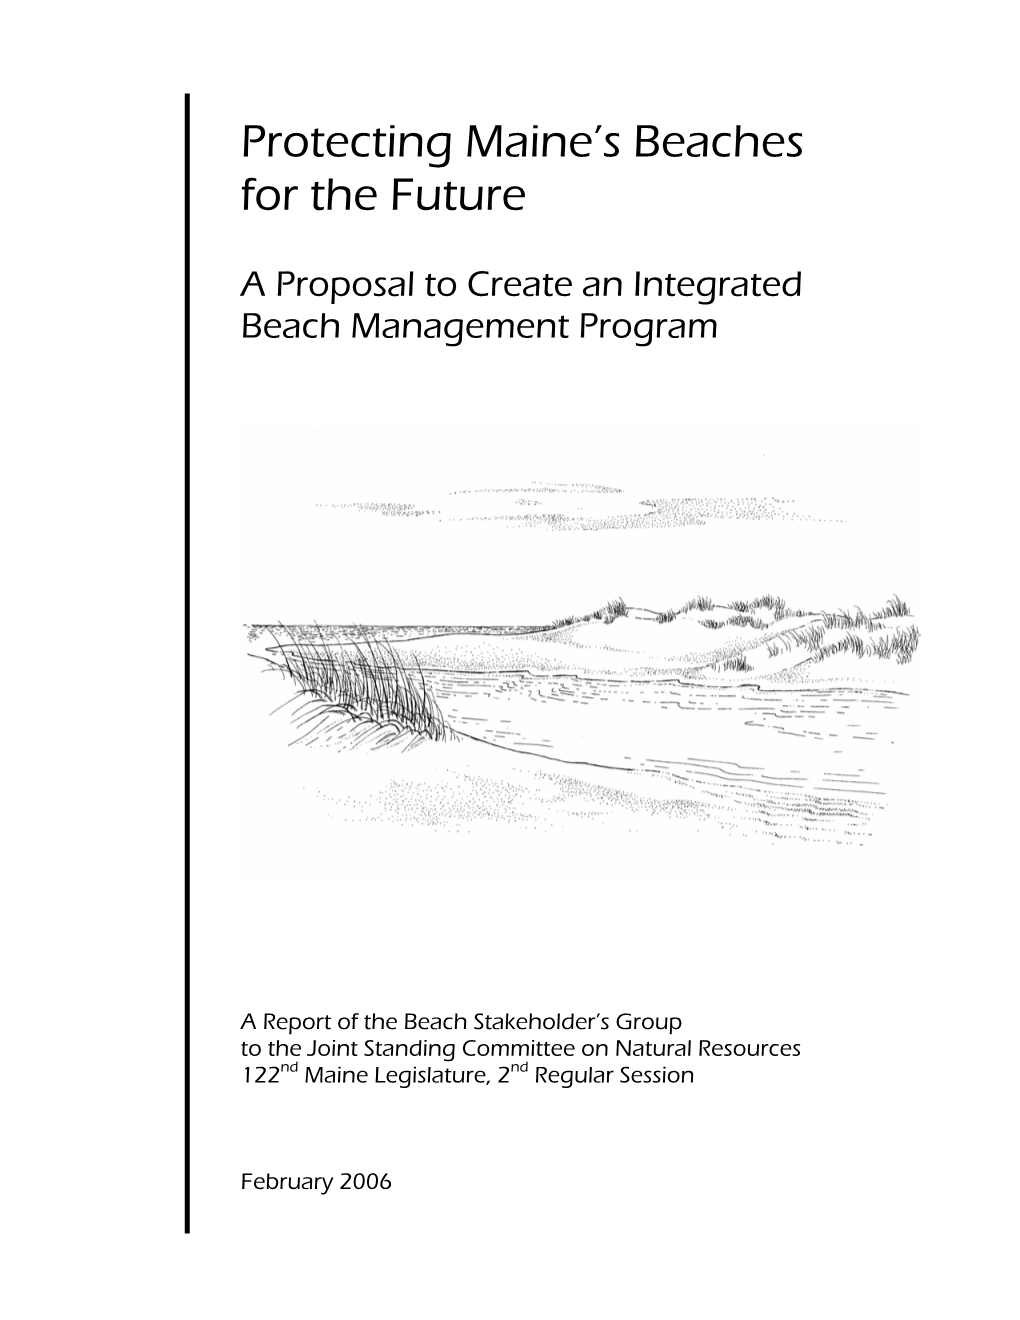 Protecting Maine's Beaches for the Future: a Proposal to Create an Integrated Beach Management Program